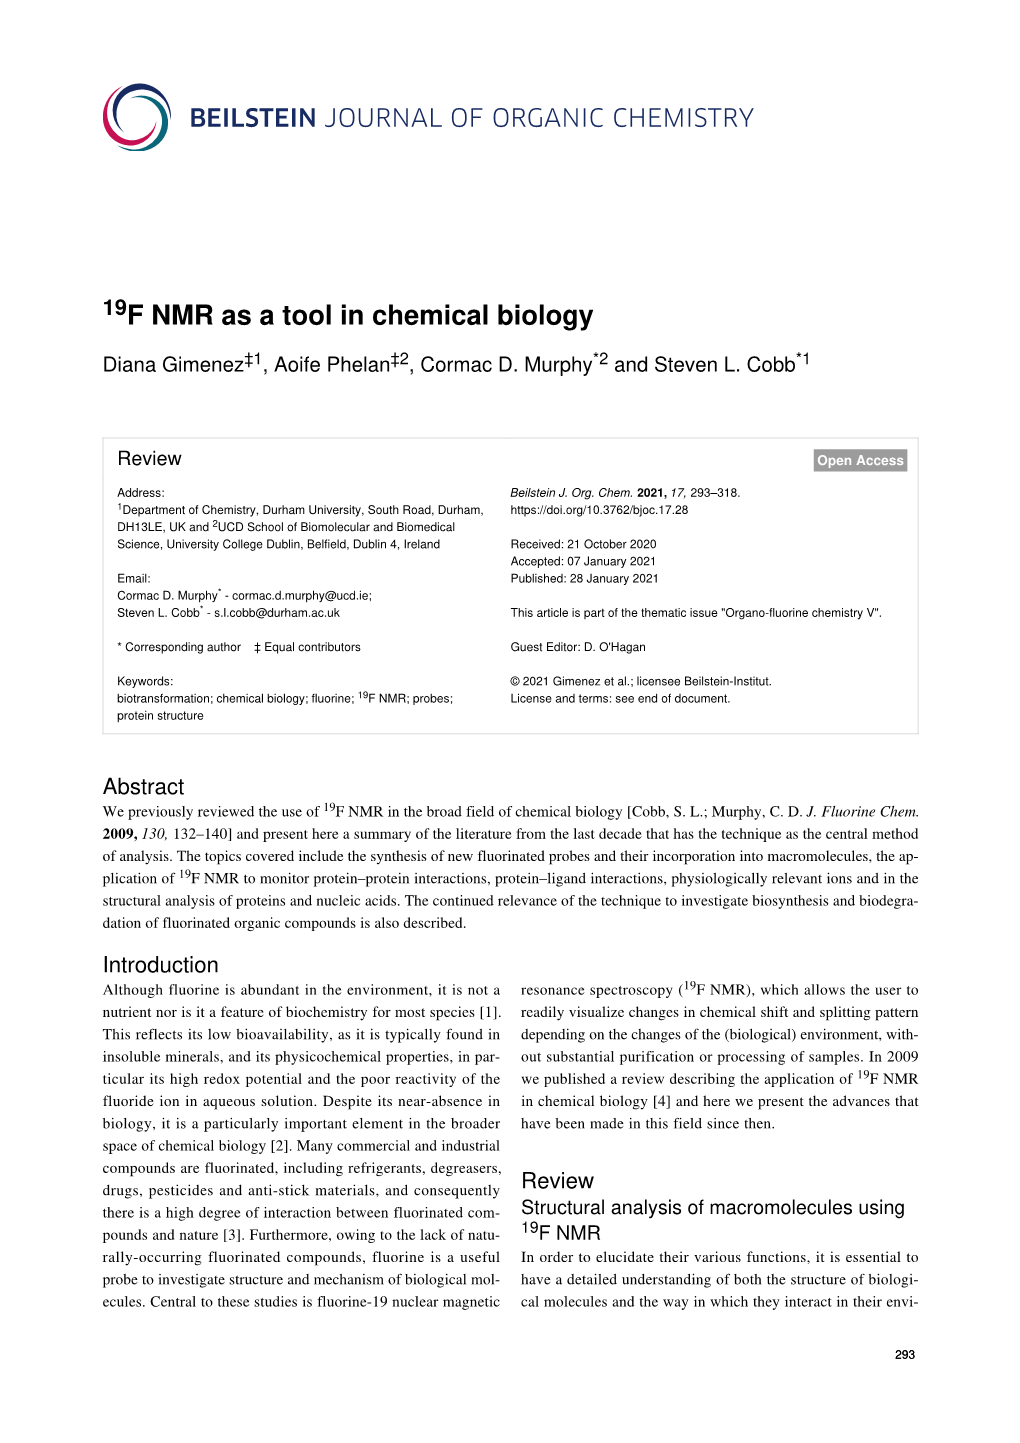 19F NMR As a Tool in Chemical Biology